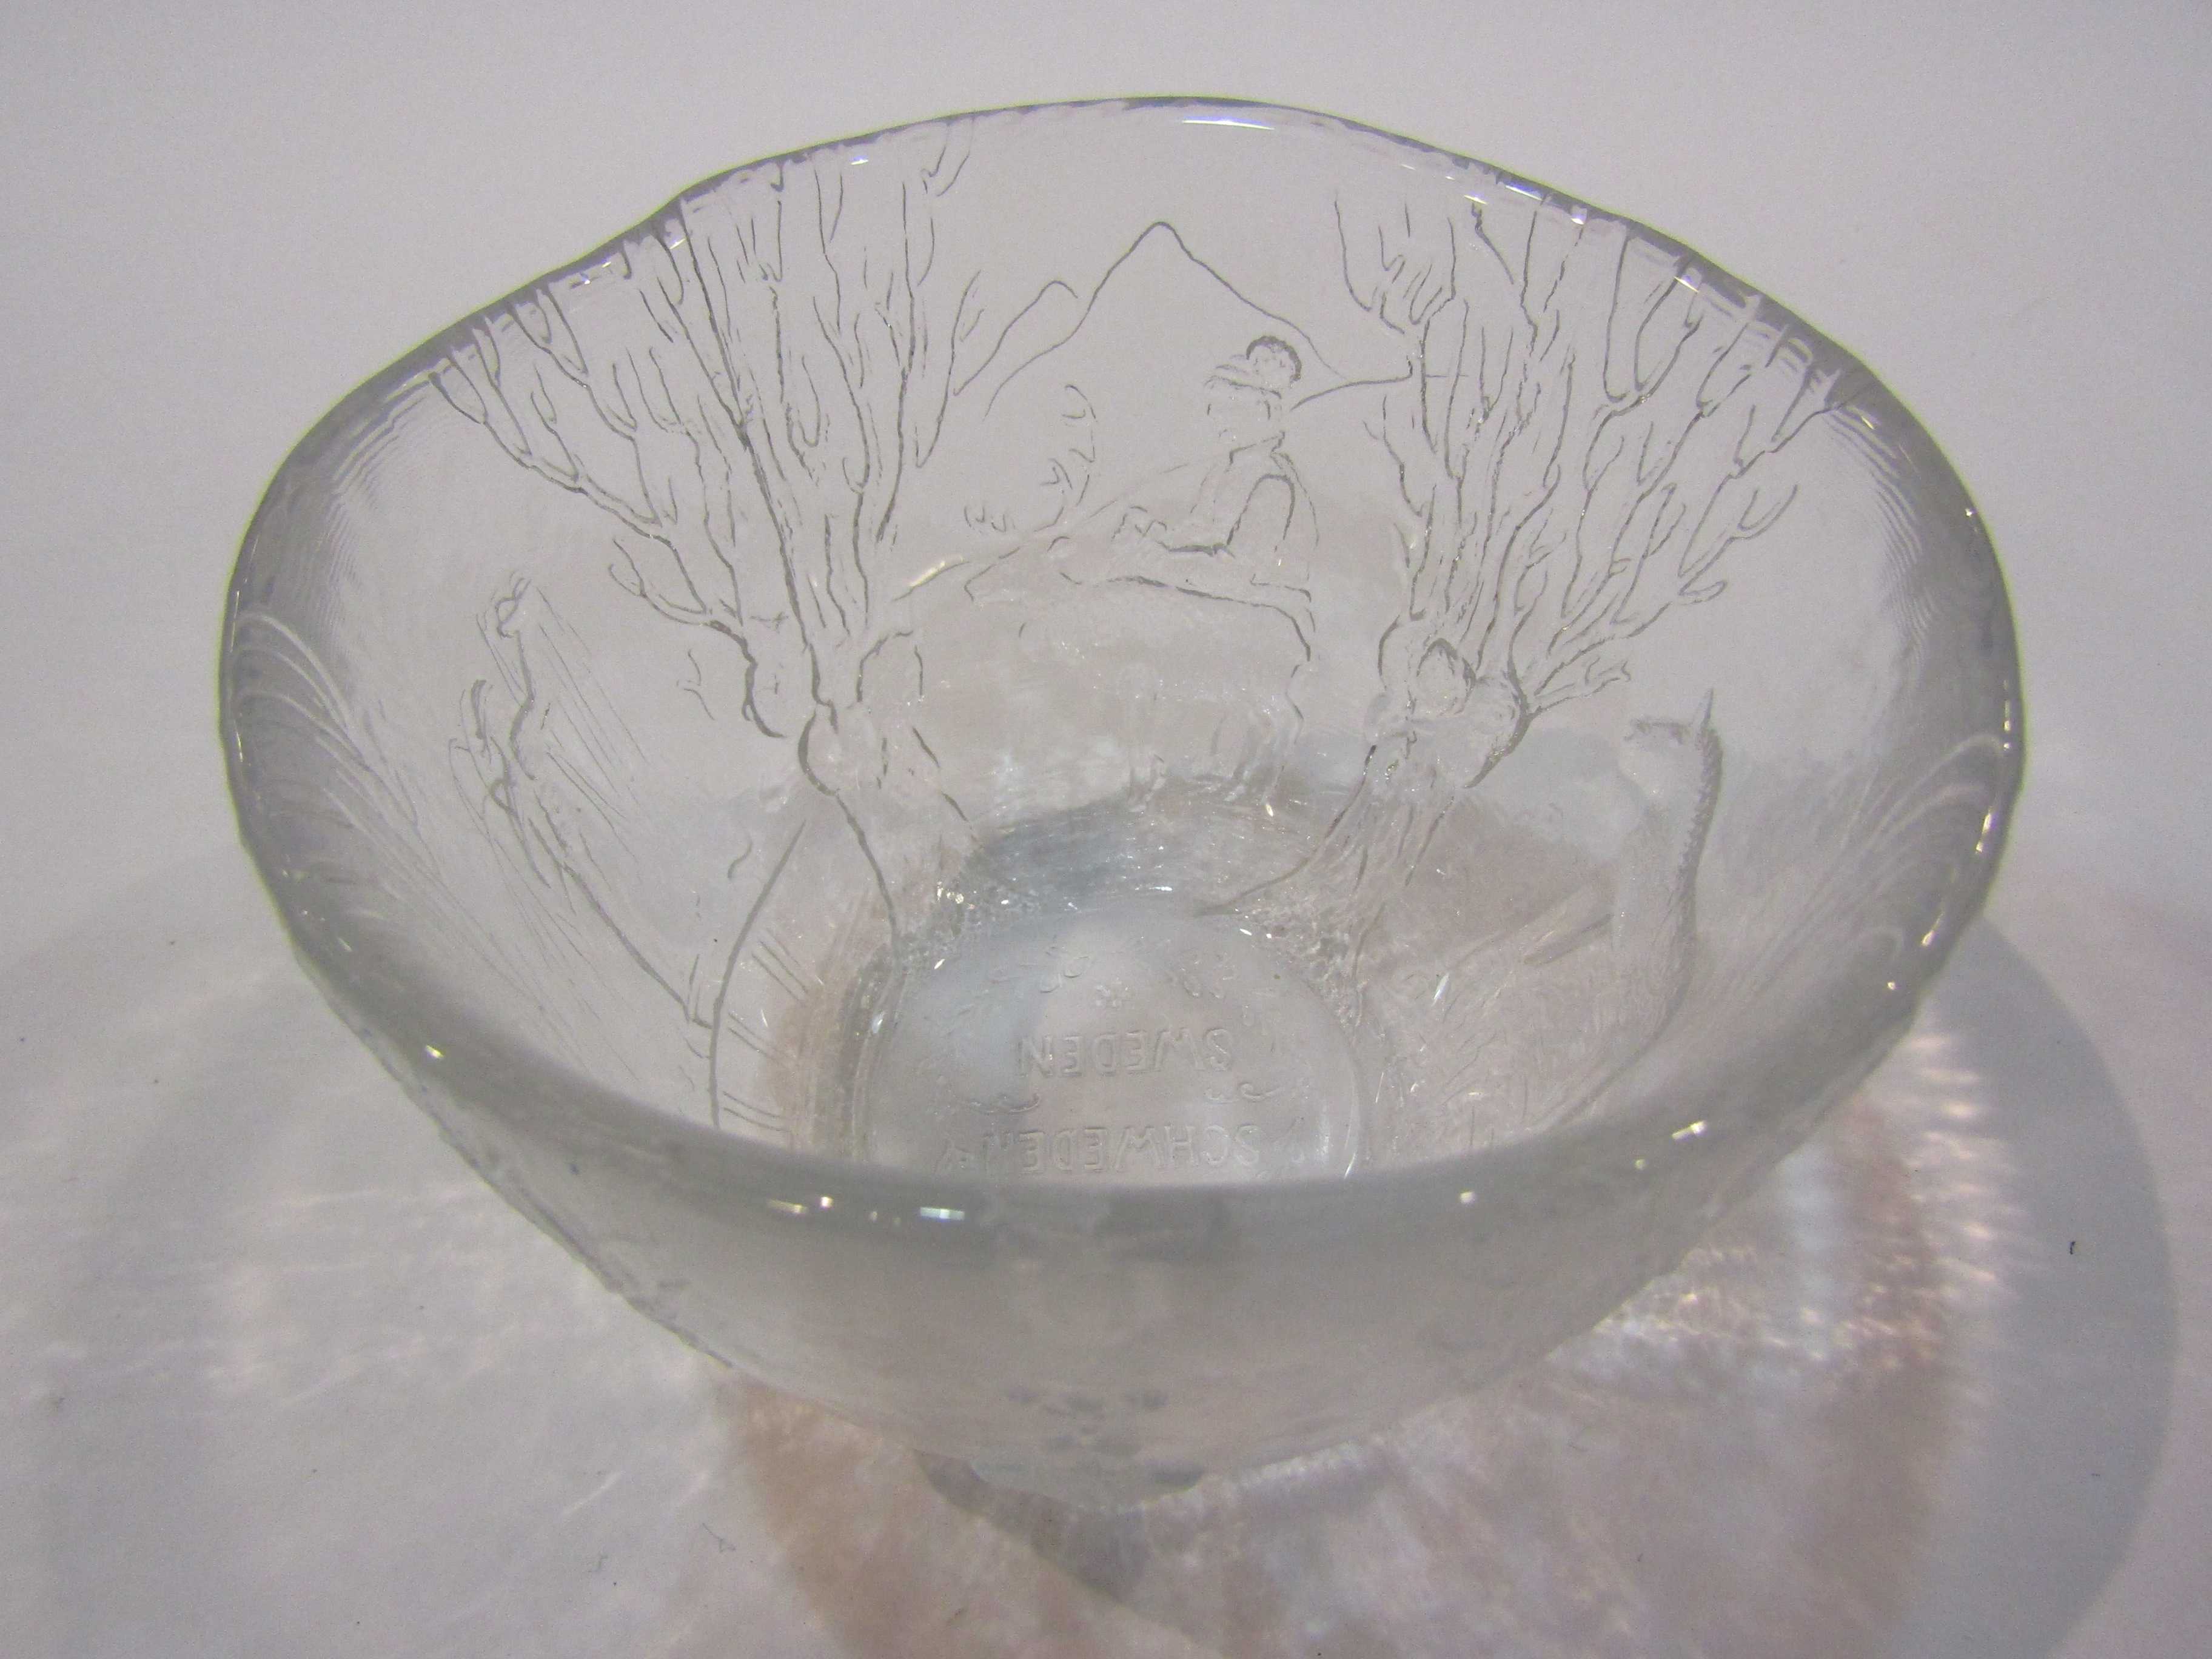 A Boda of Sweden clear glass bowl, - Image 2 of 3